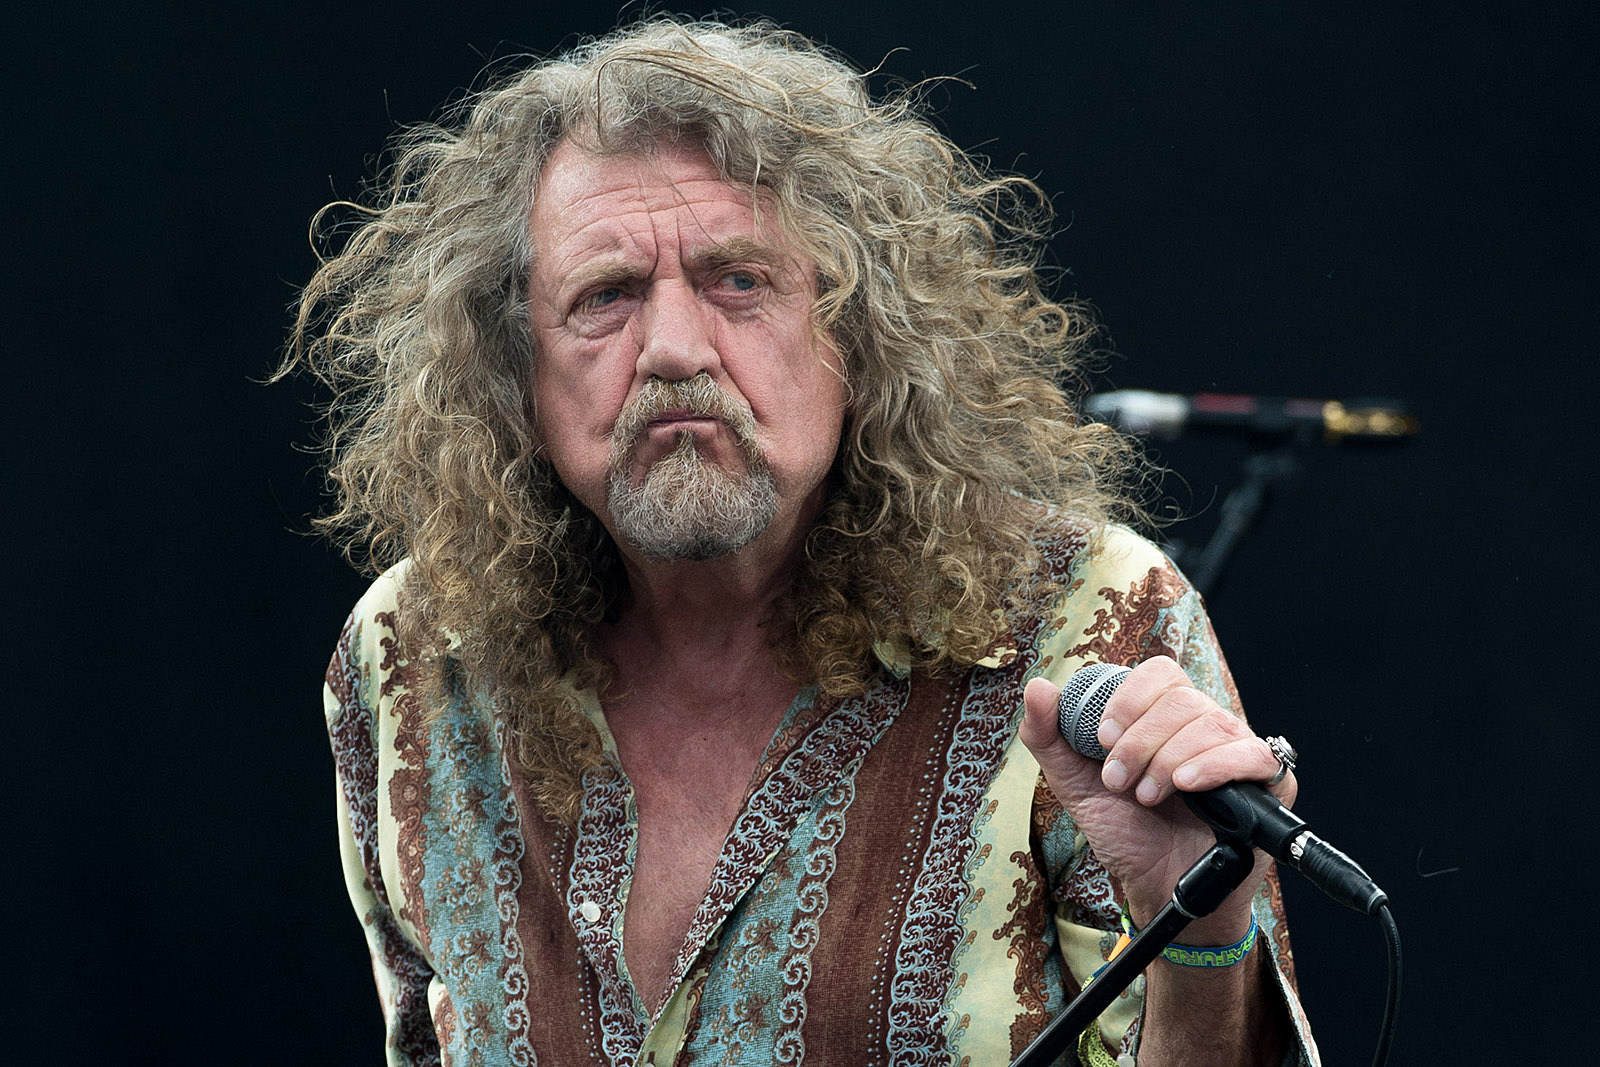 Robert Plant Says He Sometimes 'Missed the Mark' in Led Zeppelin